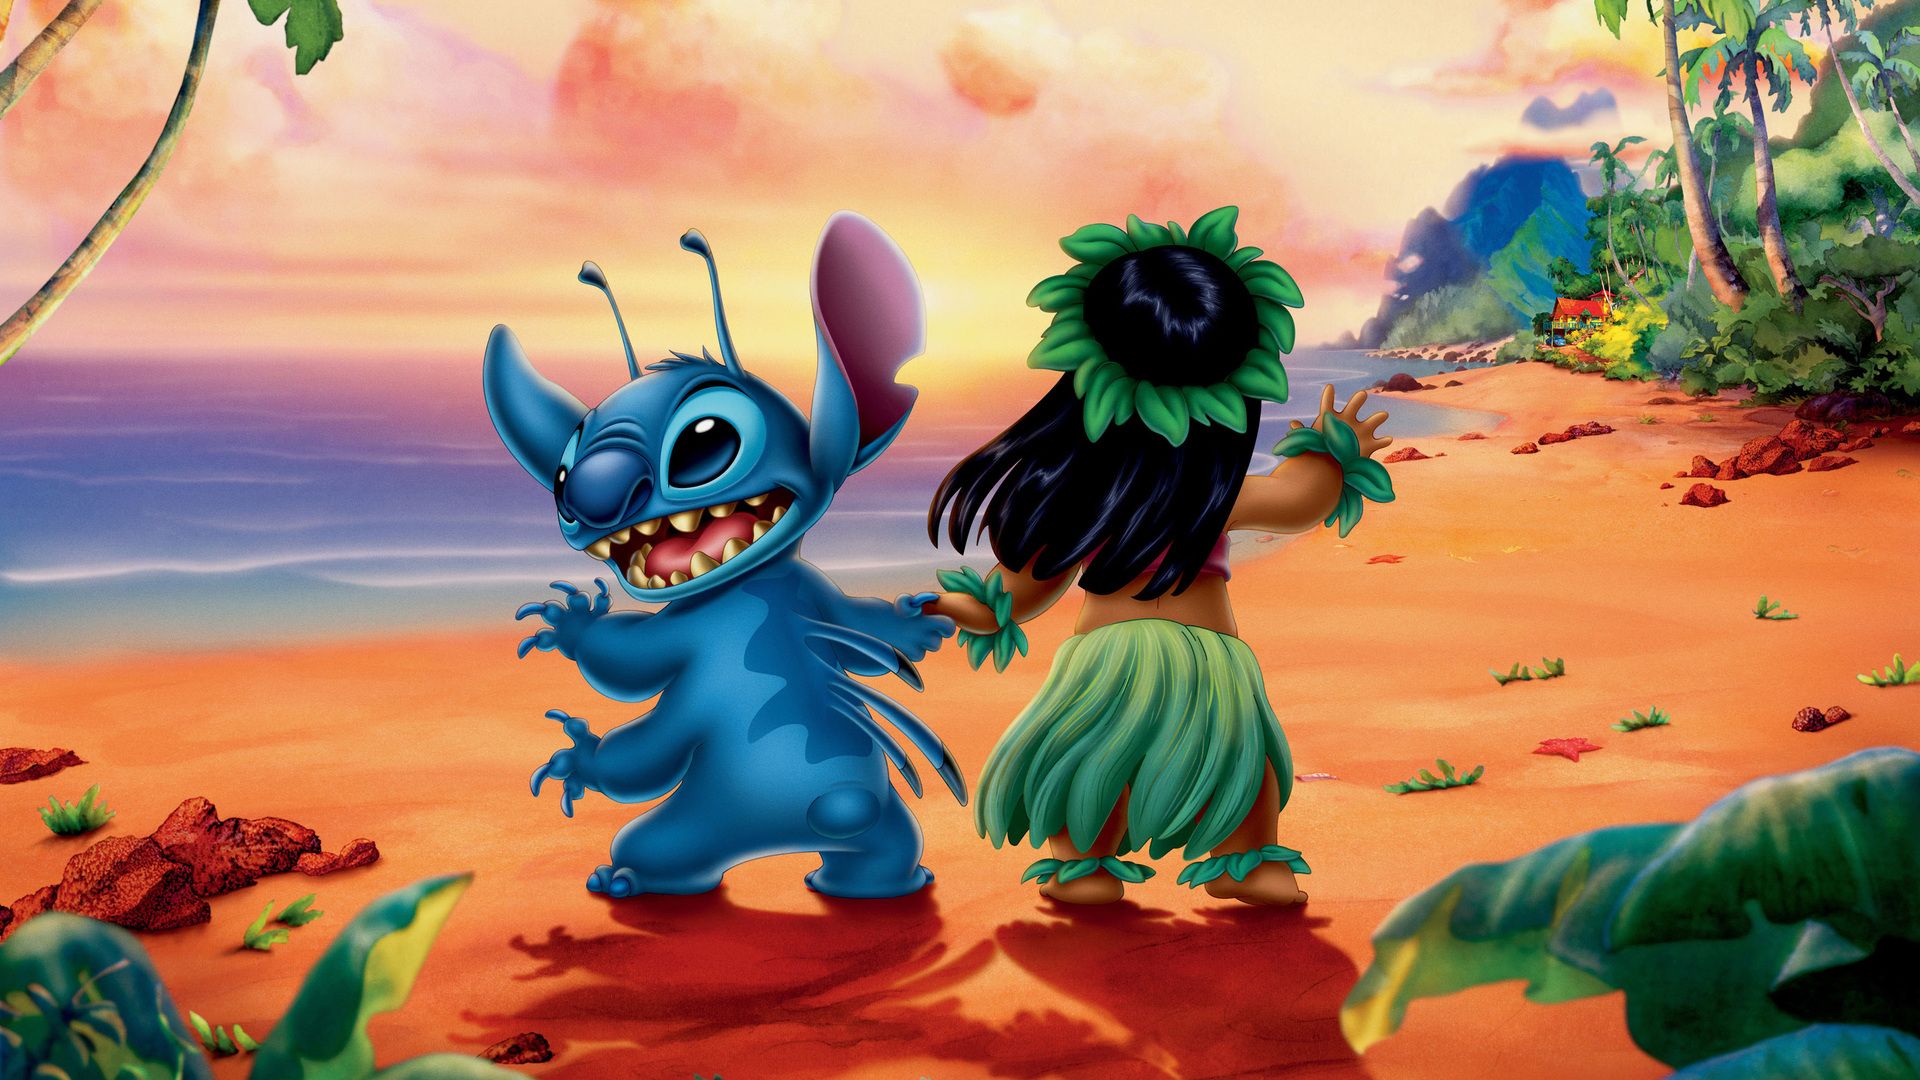 Lilo And Stitch Aesthetic Laptop Wallpaper